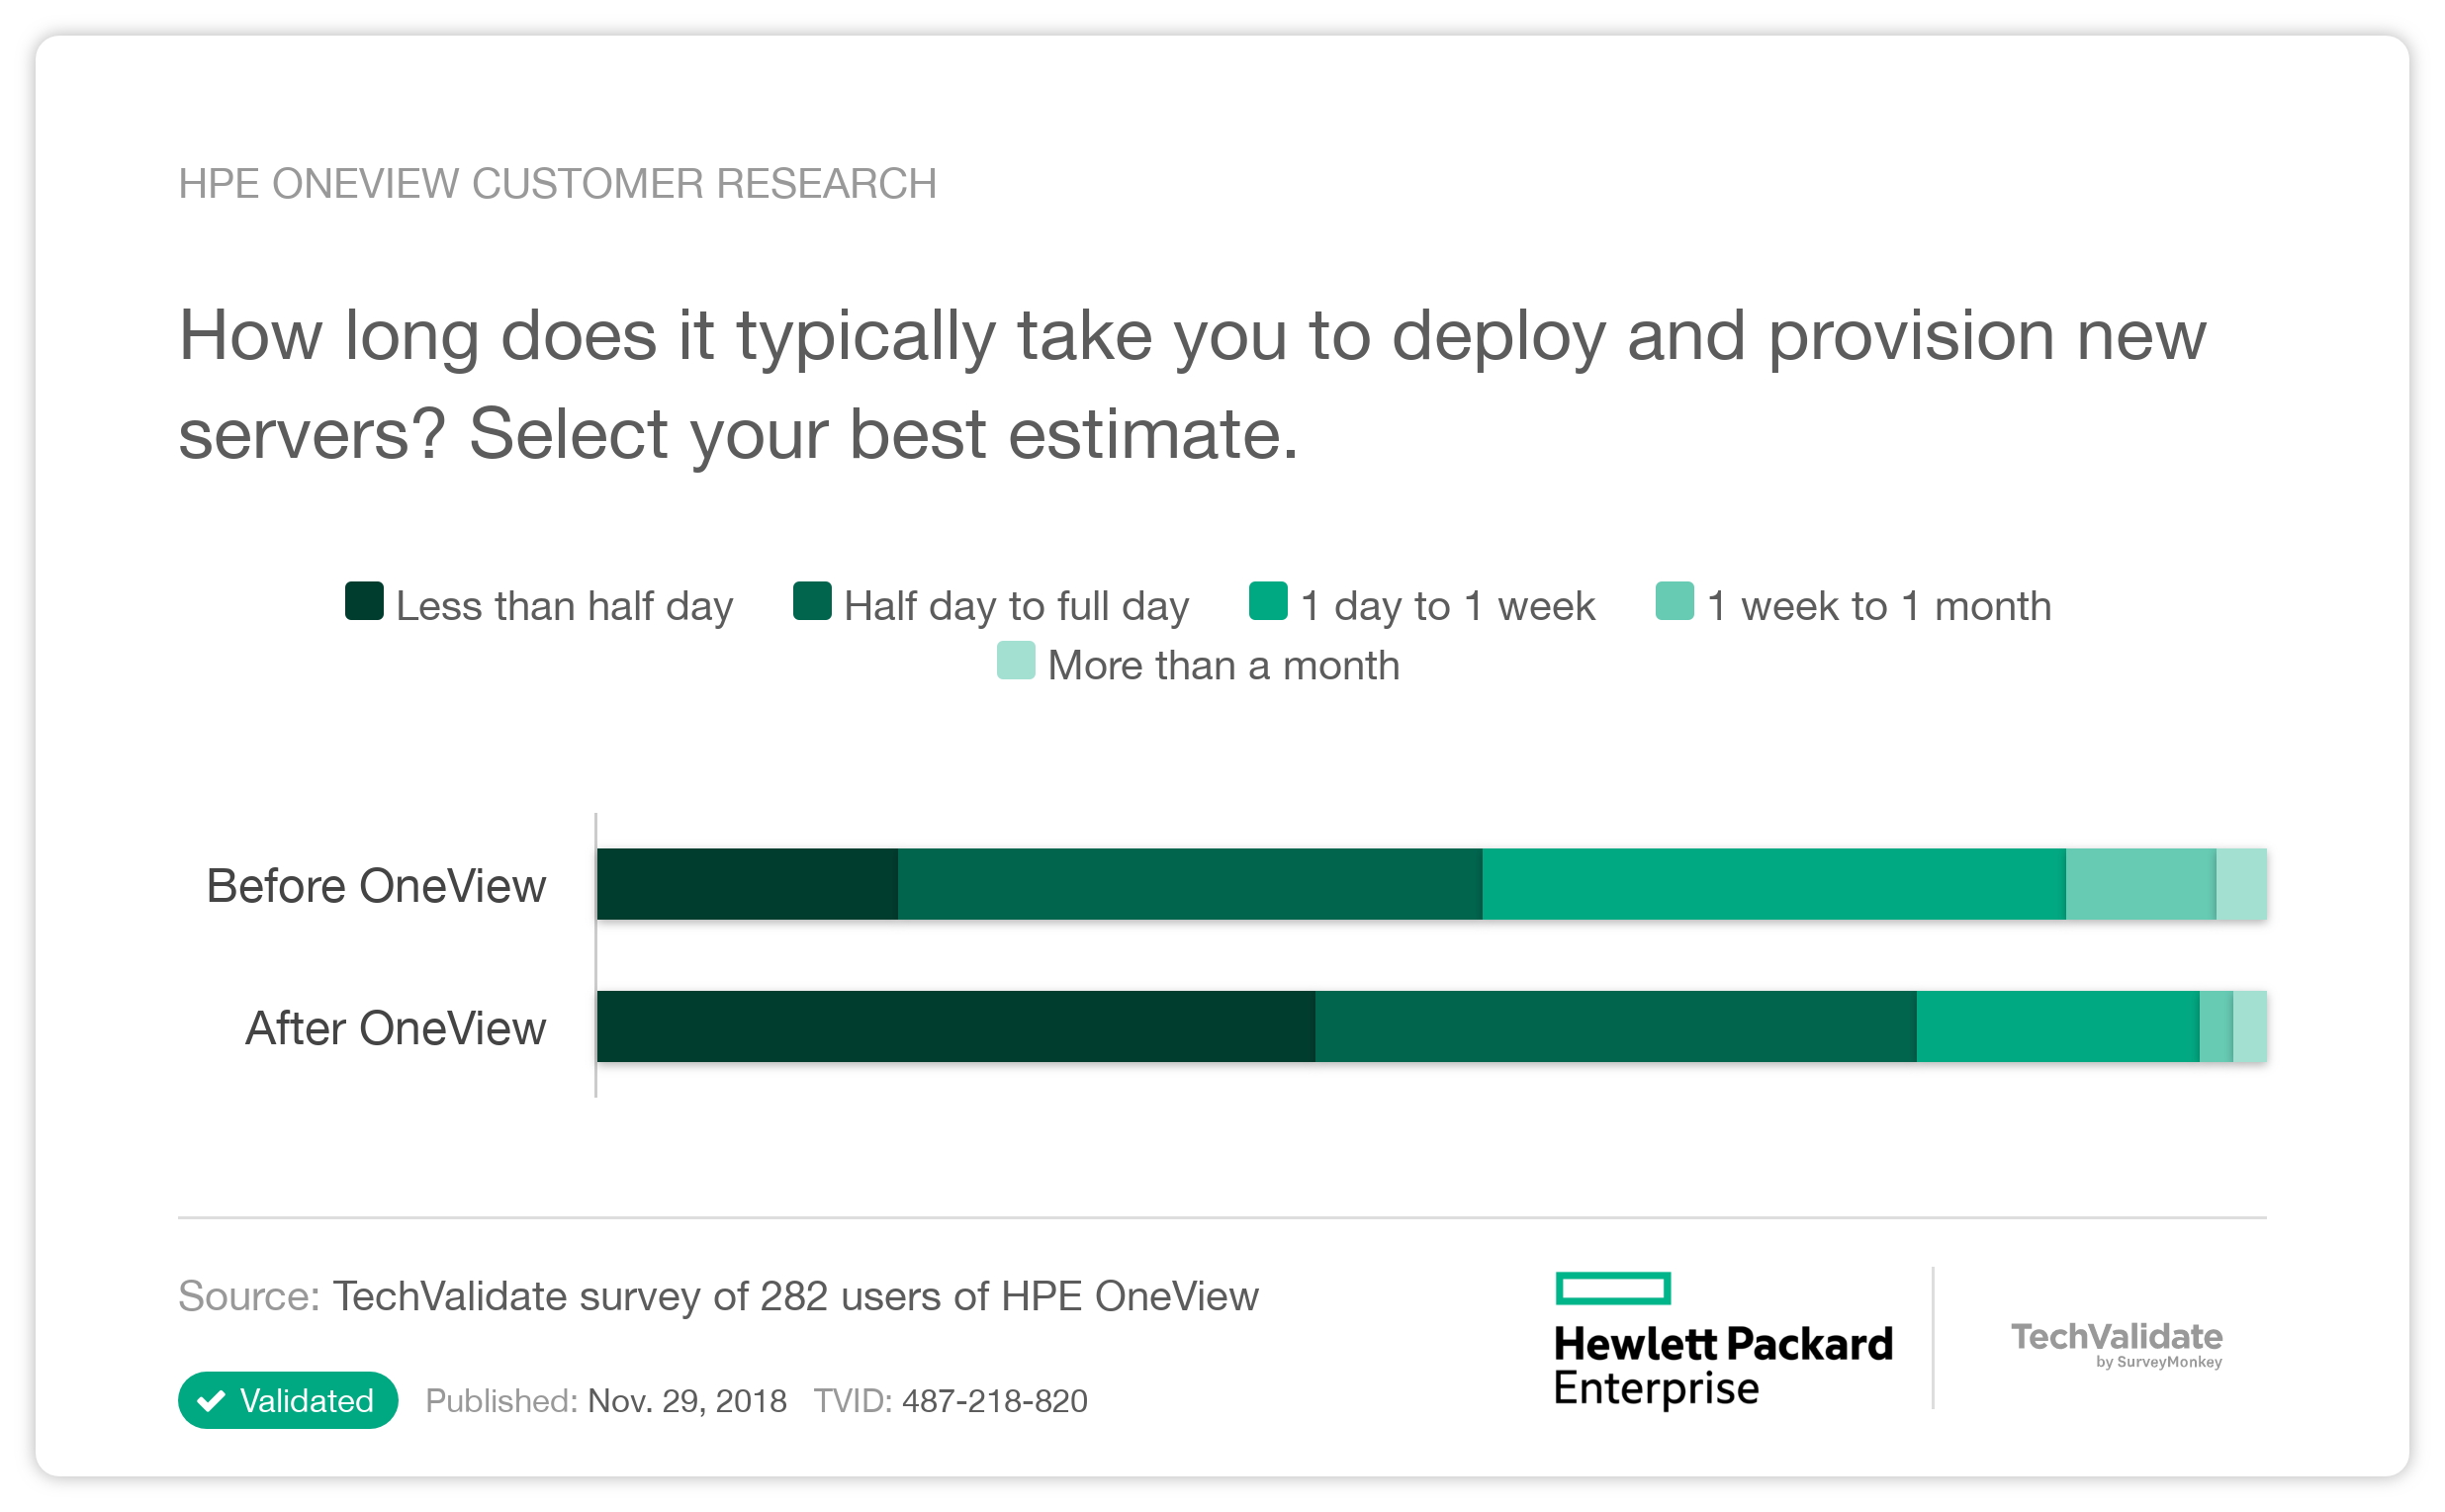 HPE OneView Customer Research